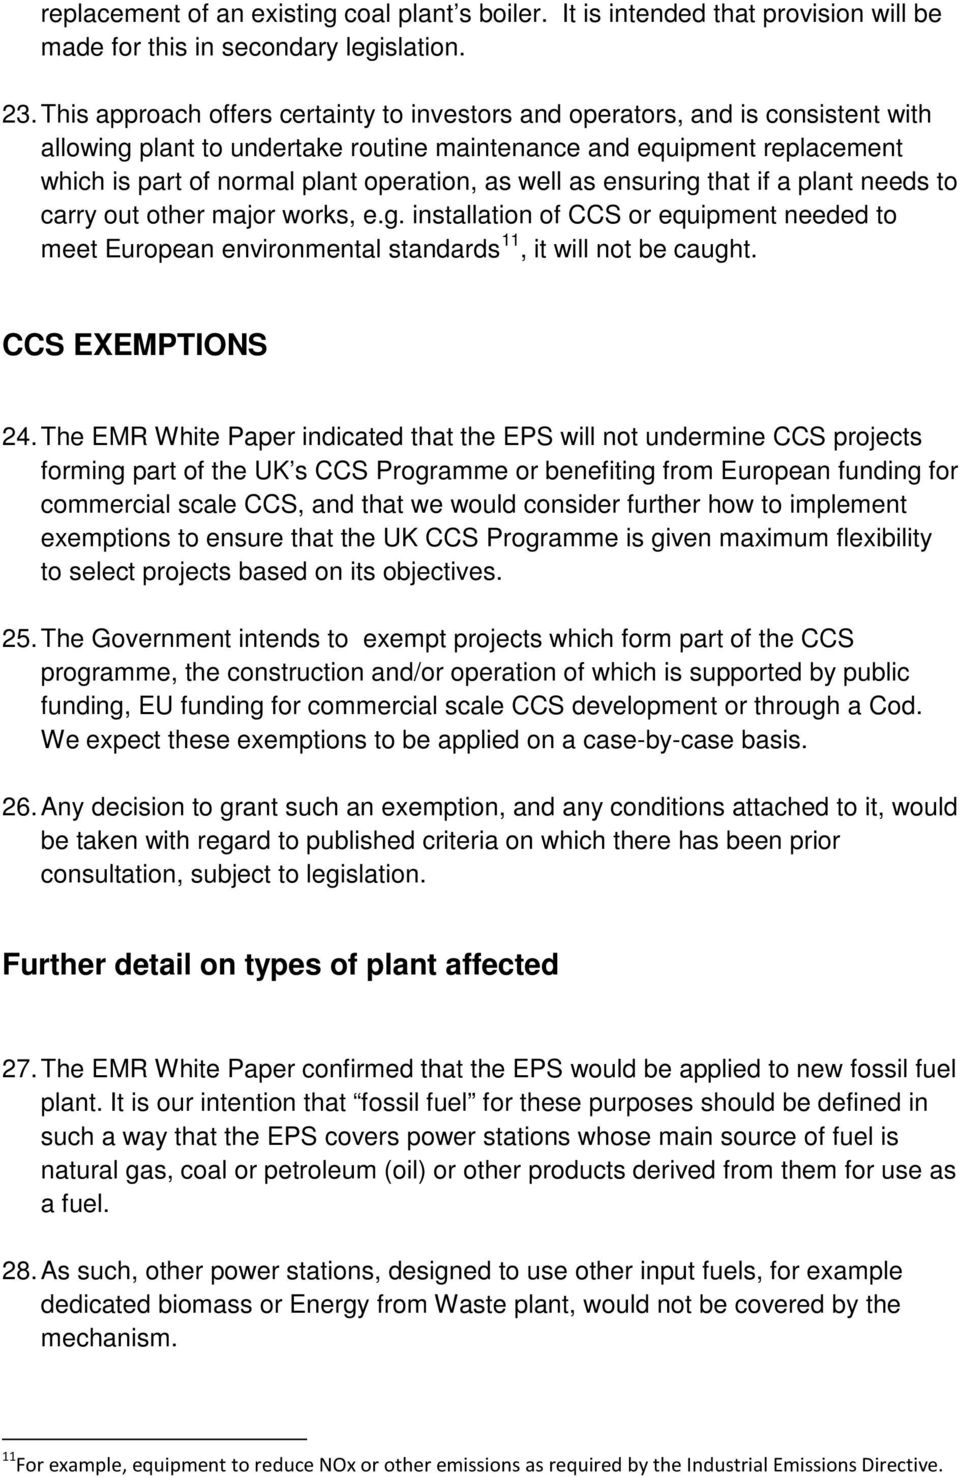 well as ensuring that if a plant needs to carry out other major works, e.g. installation of CCS or equipment needed to meet European environmental standards 11, it will not be caught.